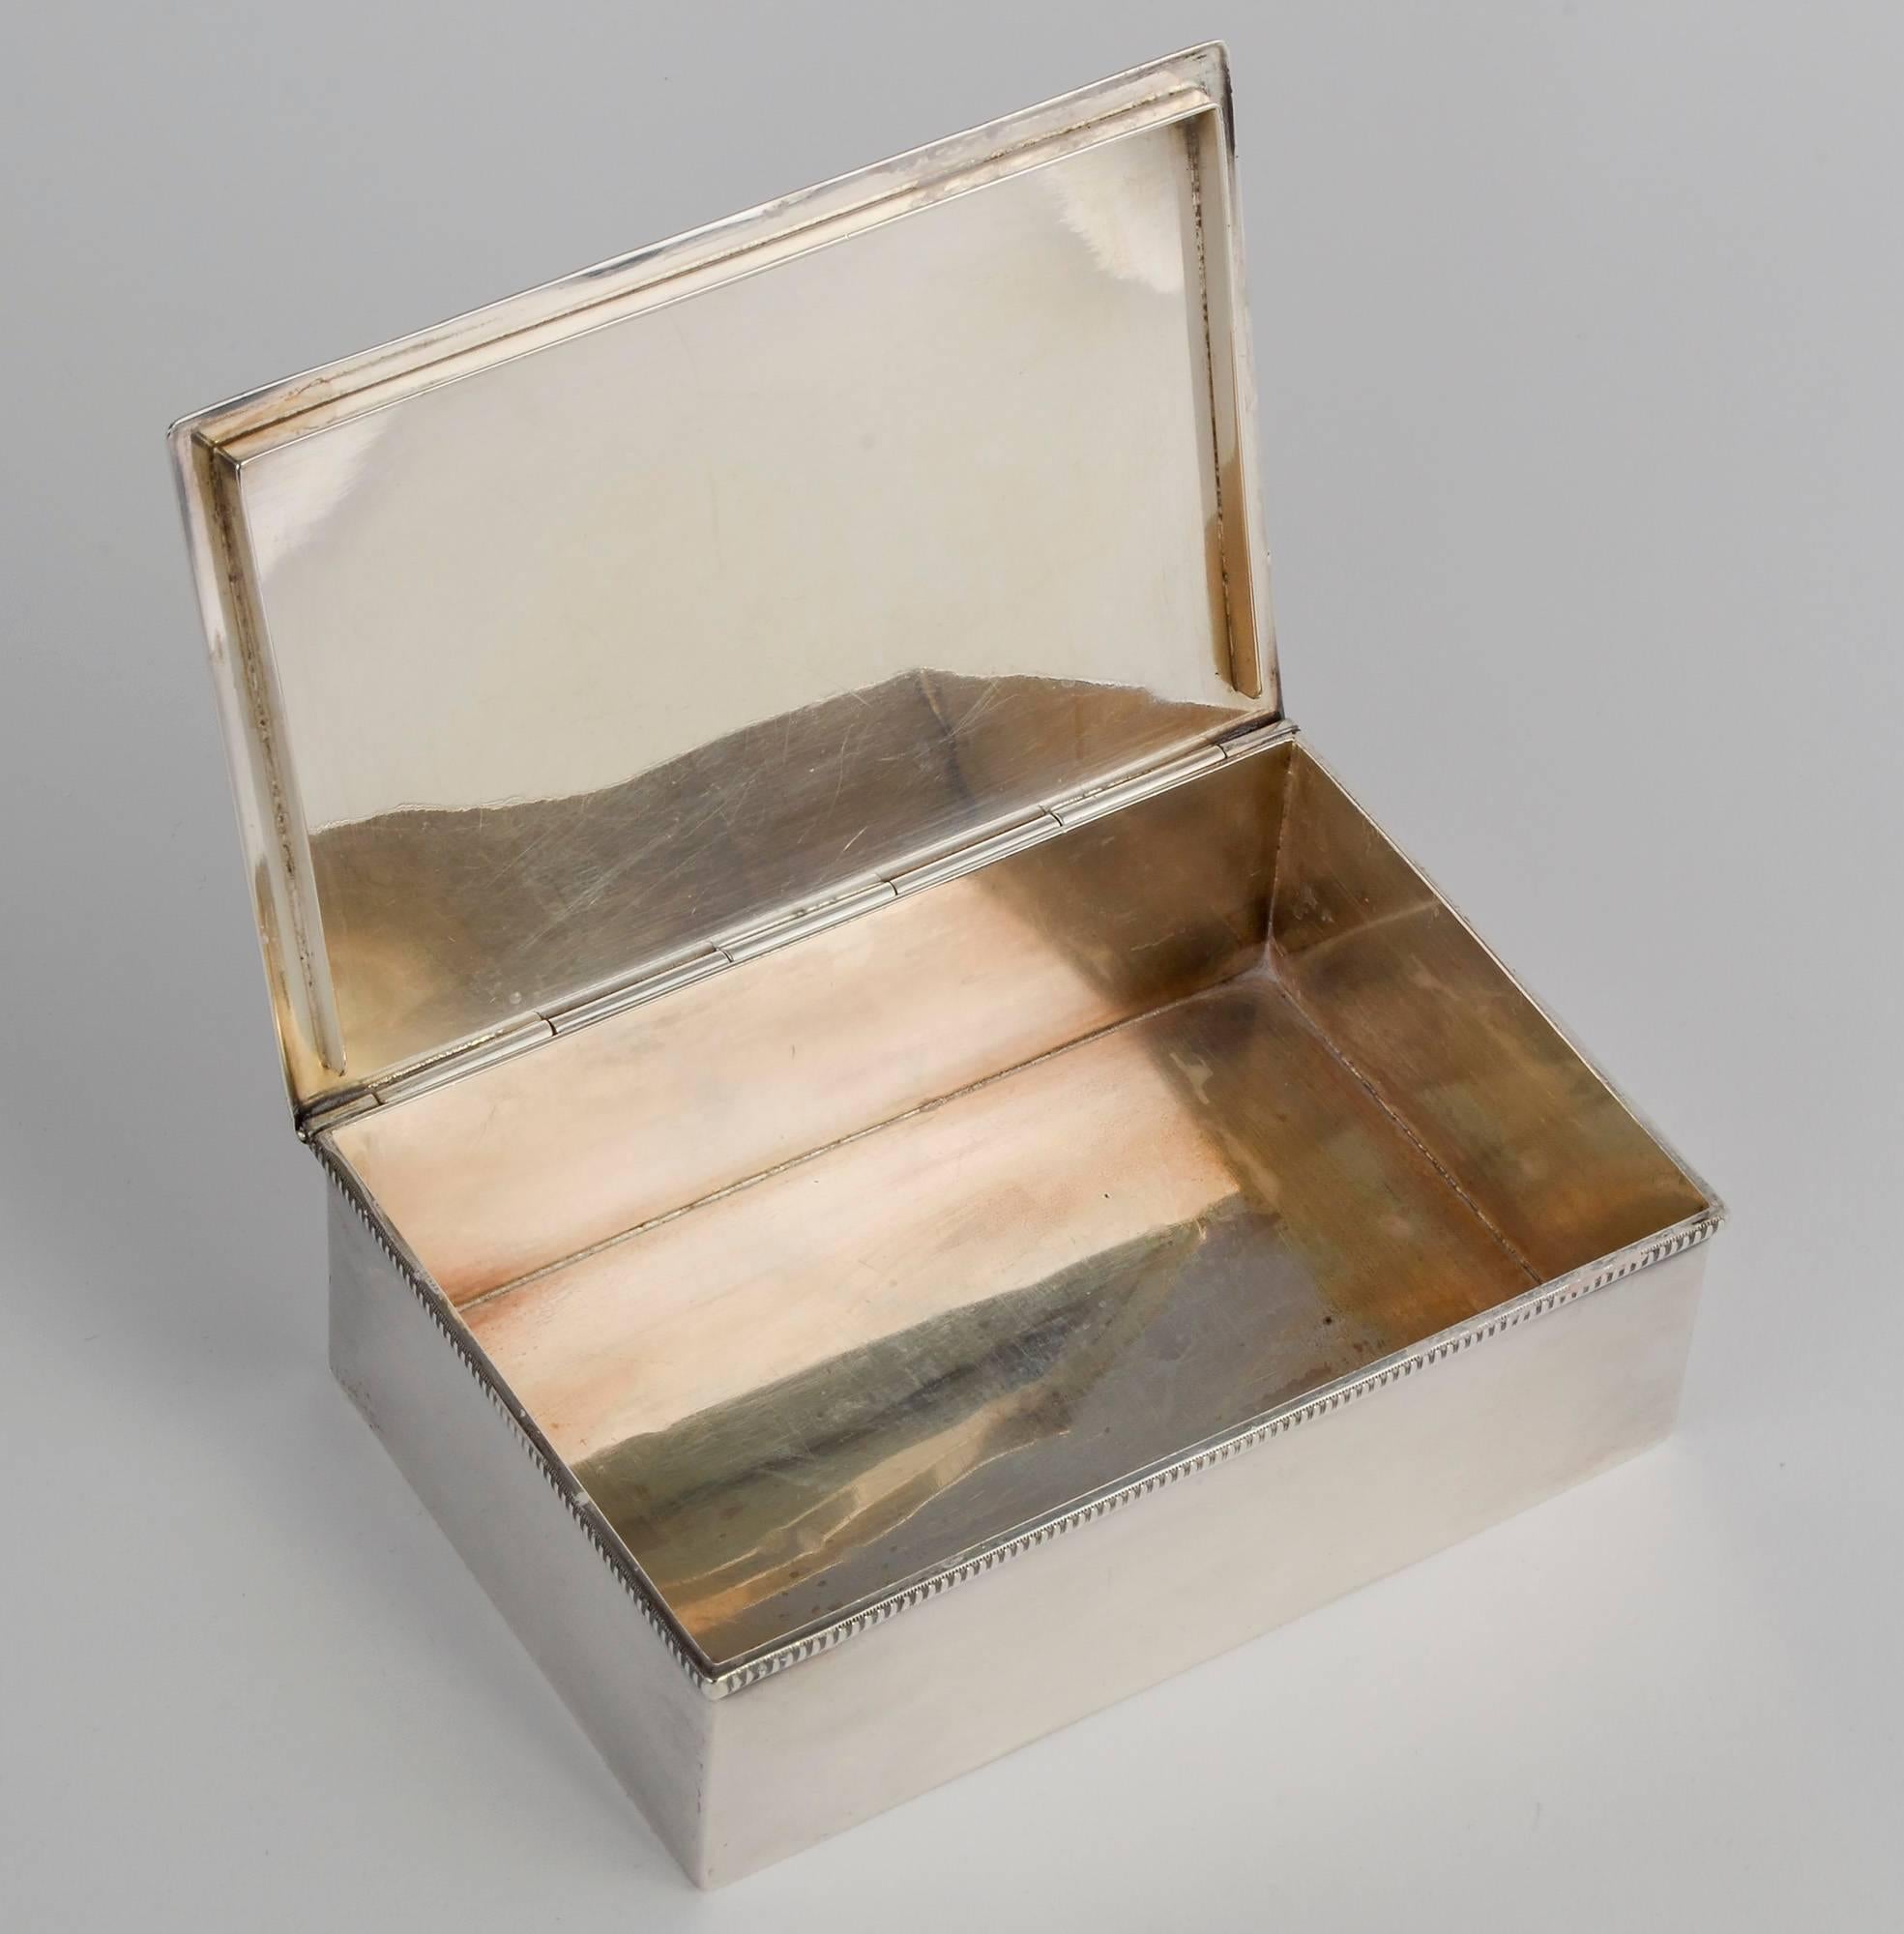 Sterling silver box by master William G. Matteo (1895 - 1980). Examples of DeMatteo's work are in the collections of the Dallas Museum of Art and the Houston Museum of Fine Arts. For a time, DeMatteo produced much of the hollowware for Georg Jensen,